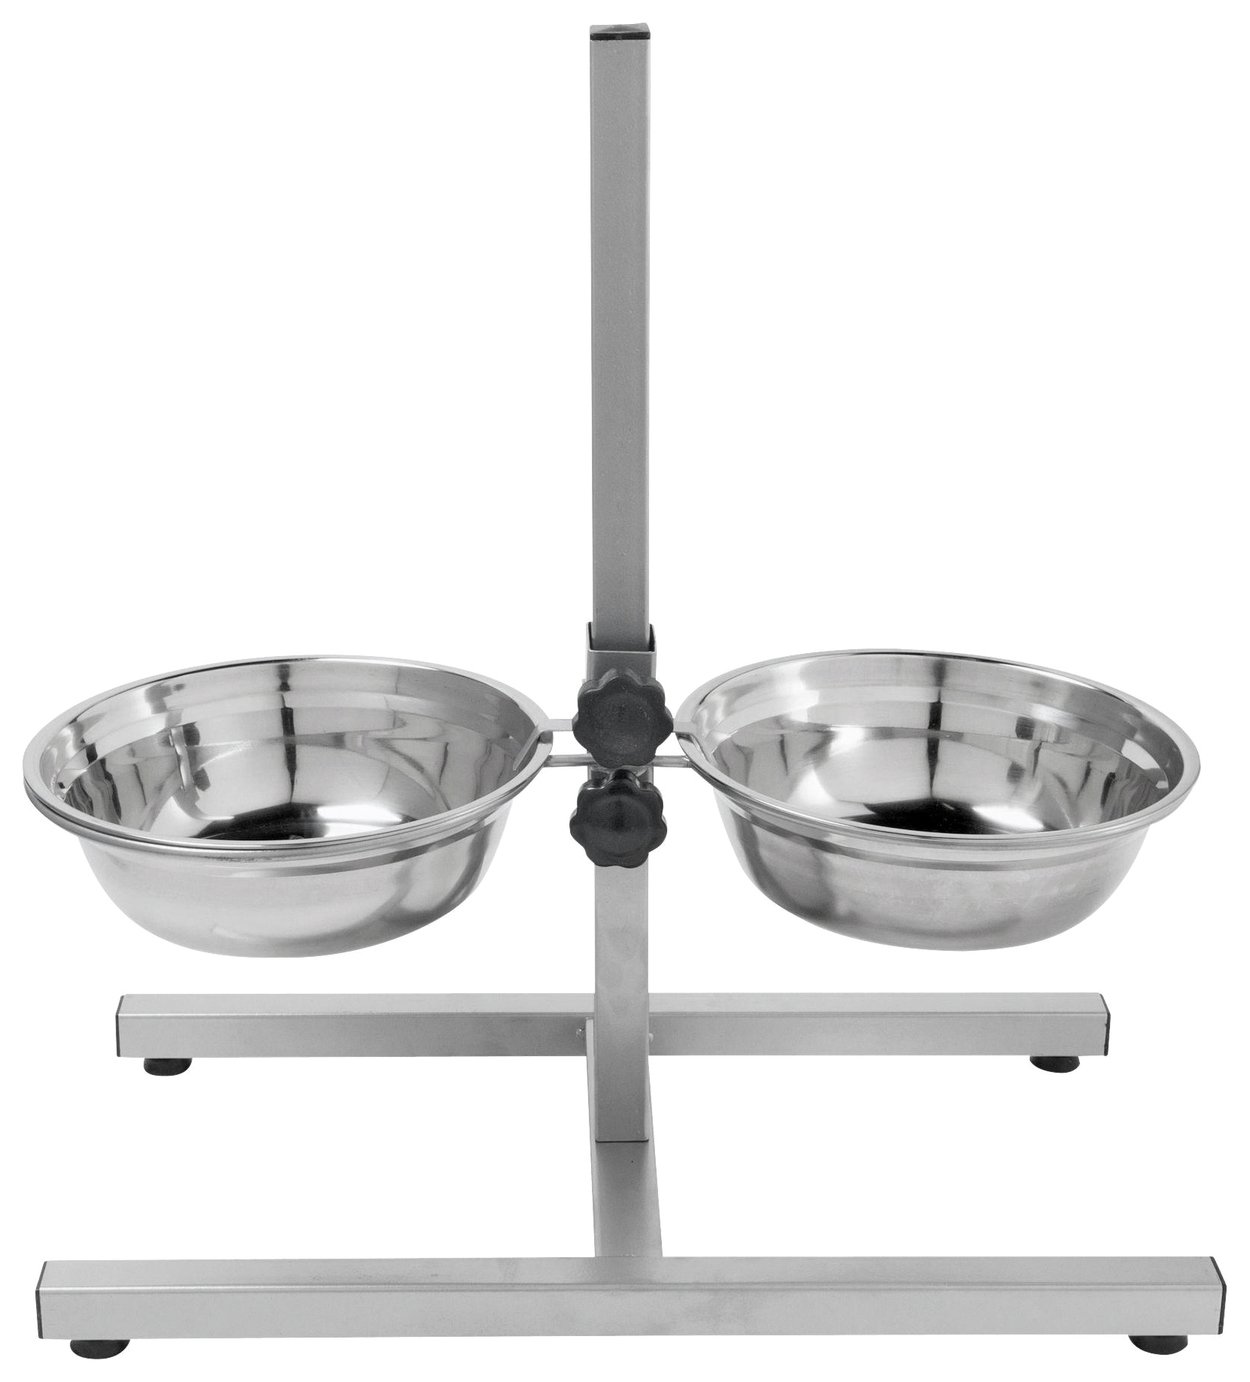 Stainless Steel Dual Dog Dining Set - Large